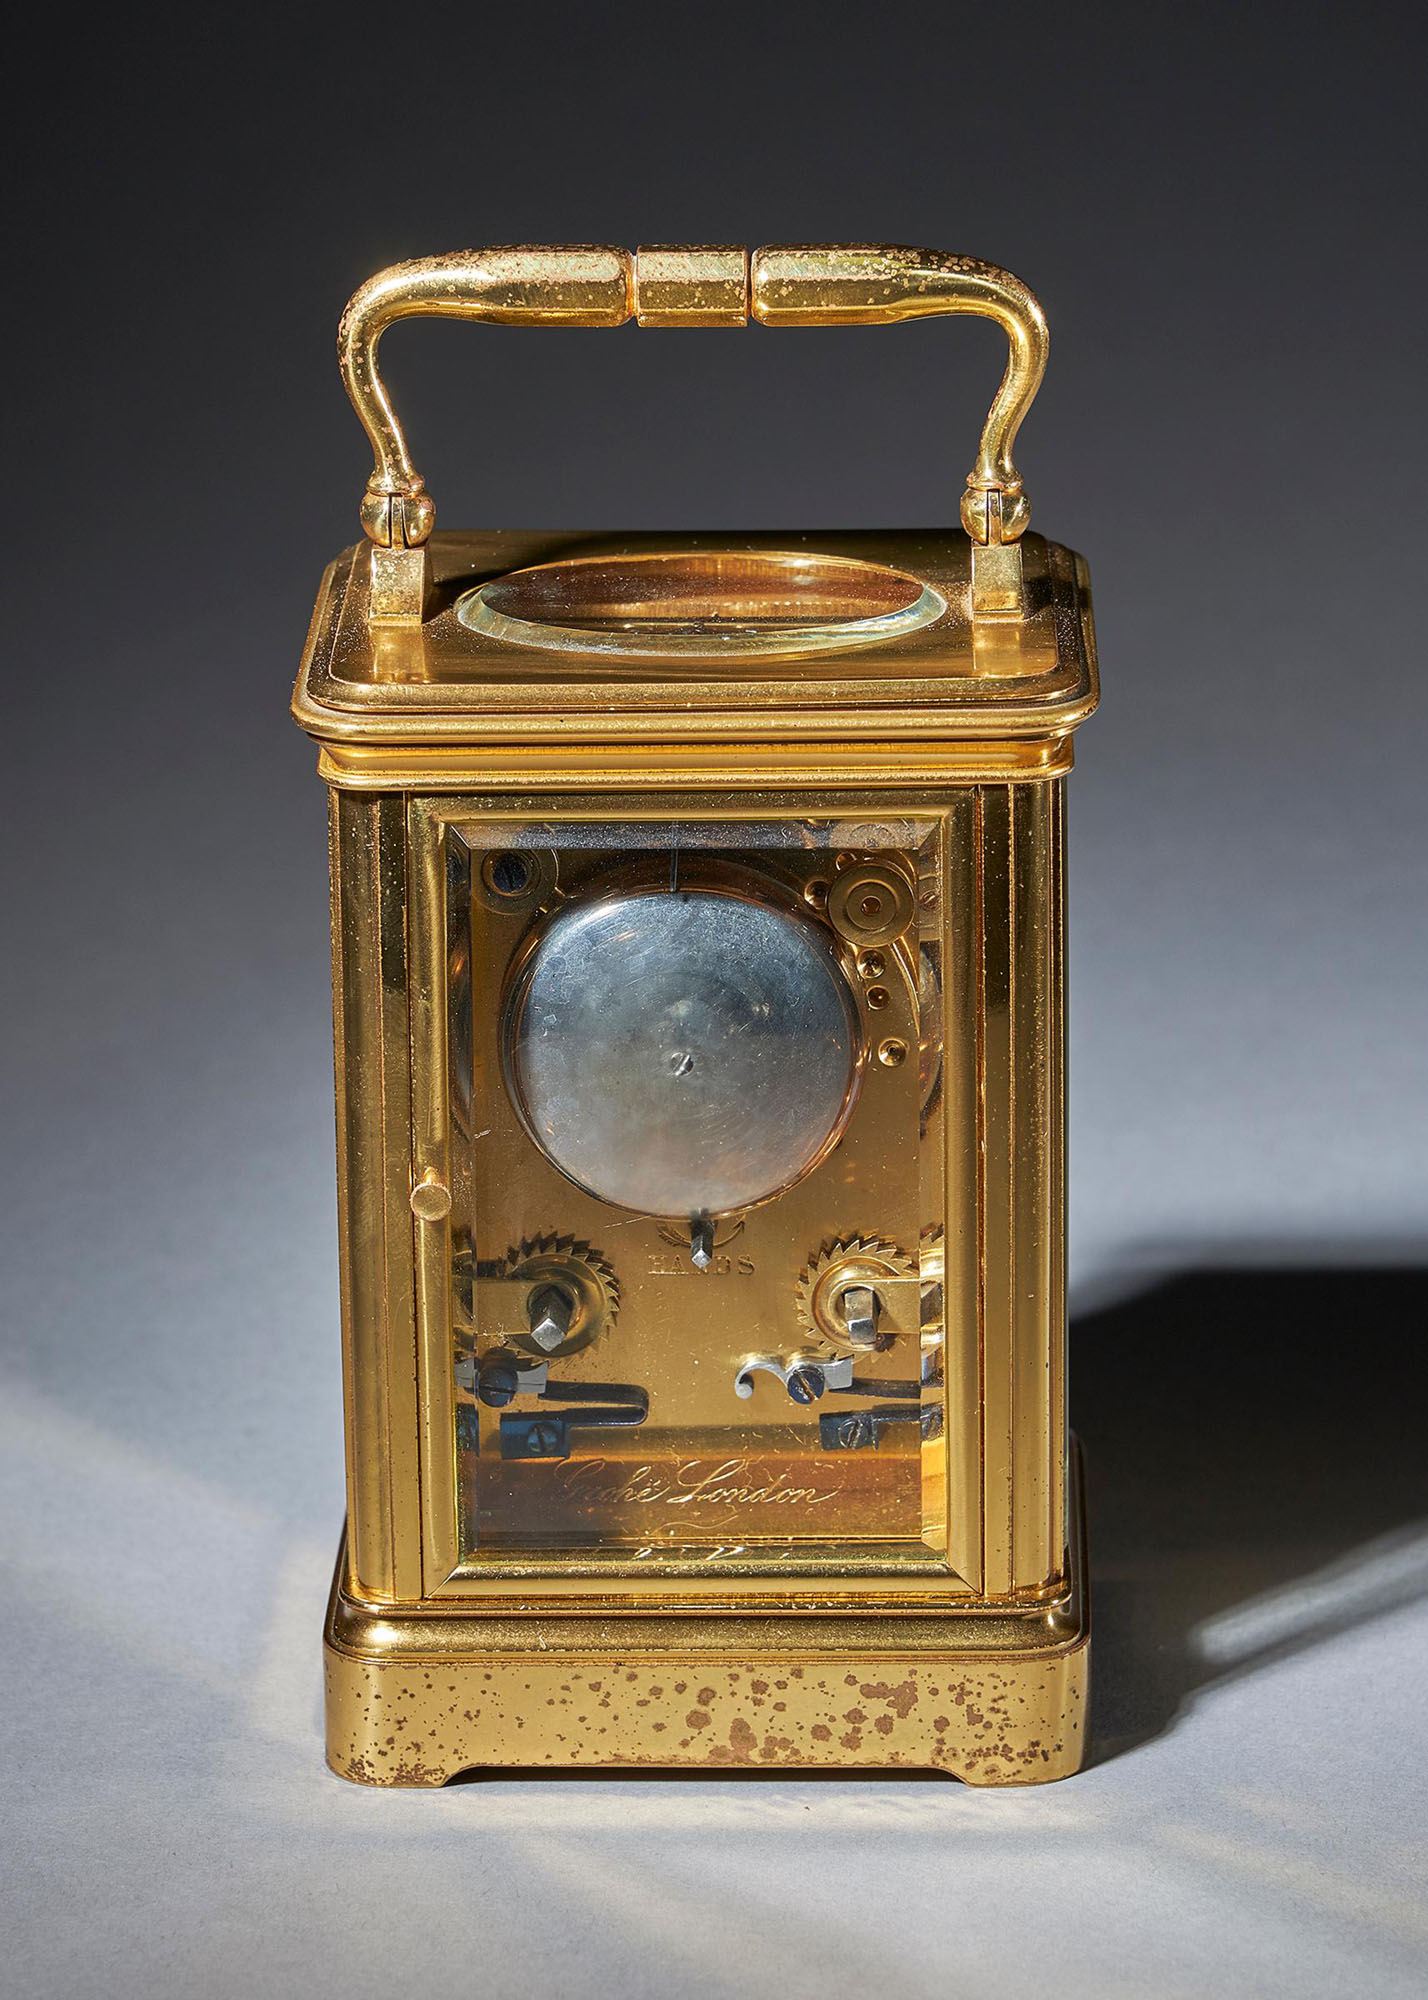 Striking 19th Century Carriage Clock with a Gilt-Brass Corniche Case by Grohé 4